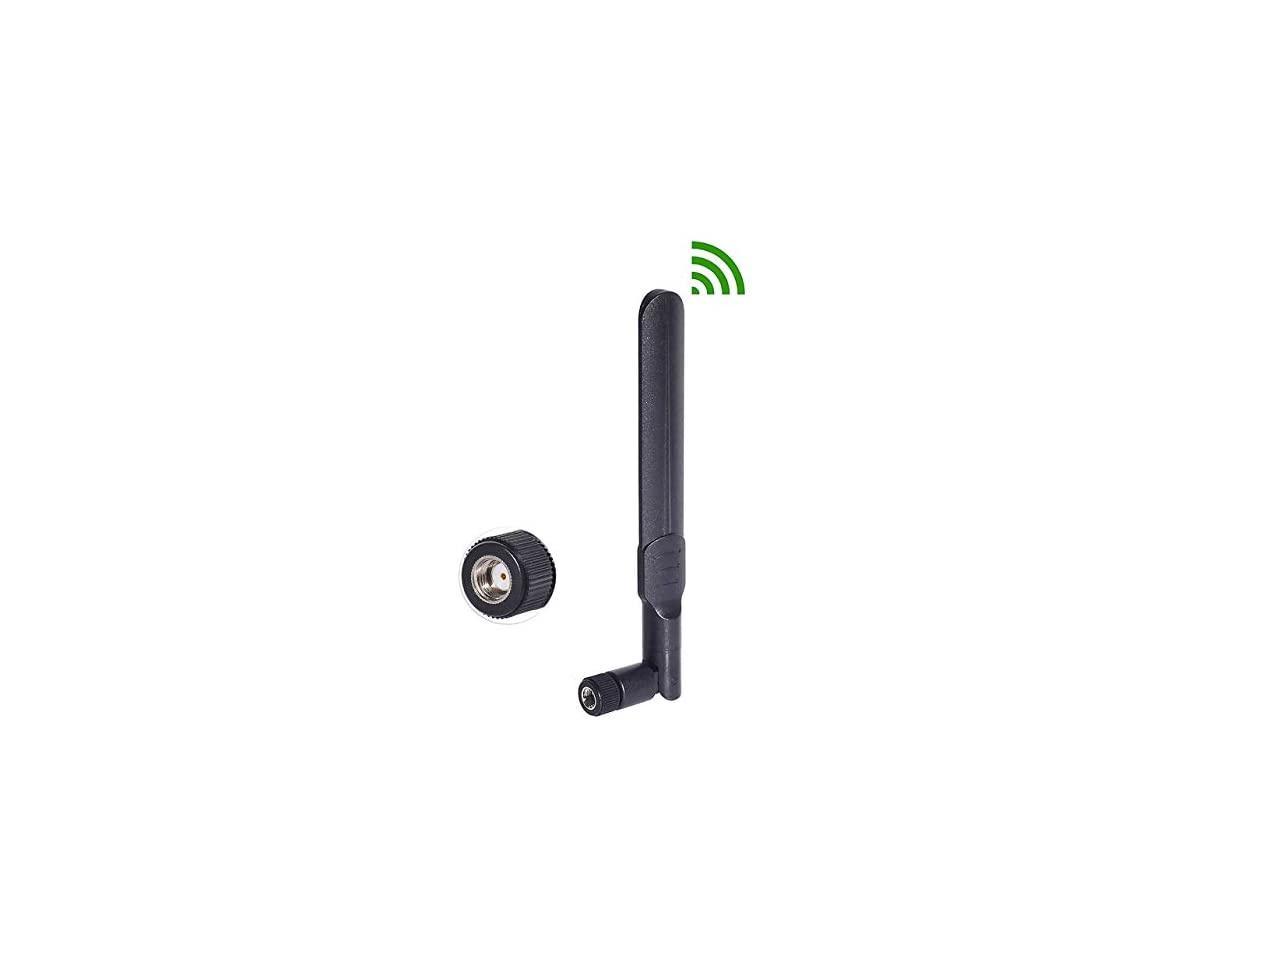 RPSMA Replacement Antenna For Spypoint Link-Micro AT&T USA Cellular Trail Camera 